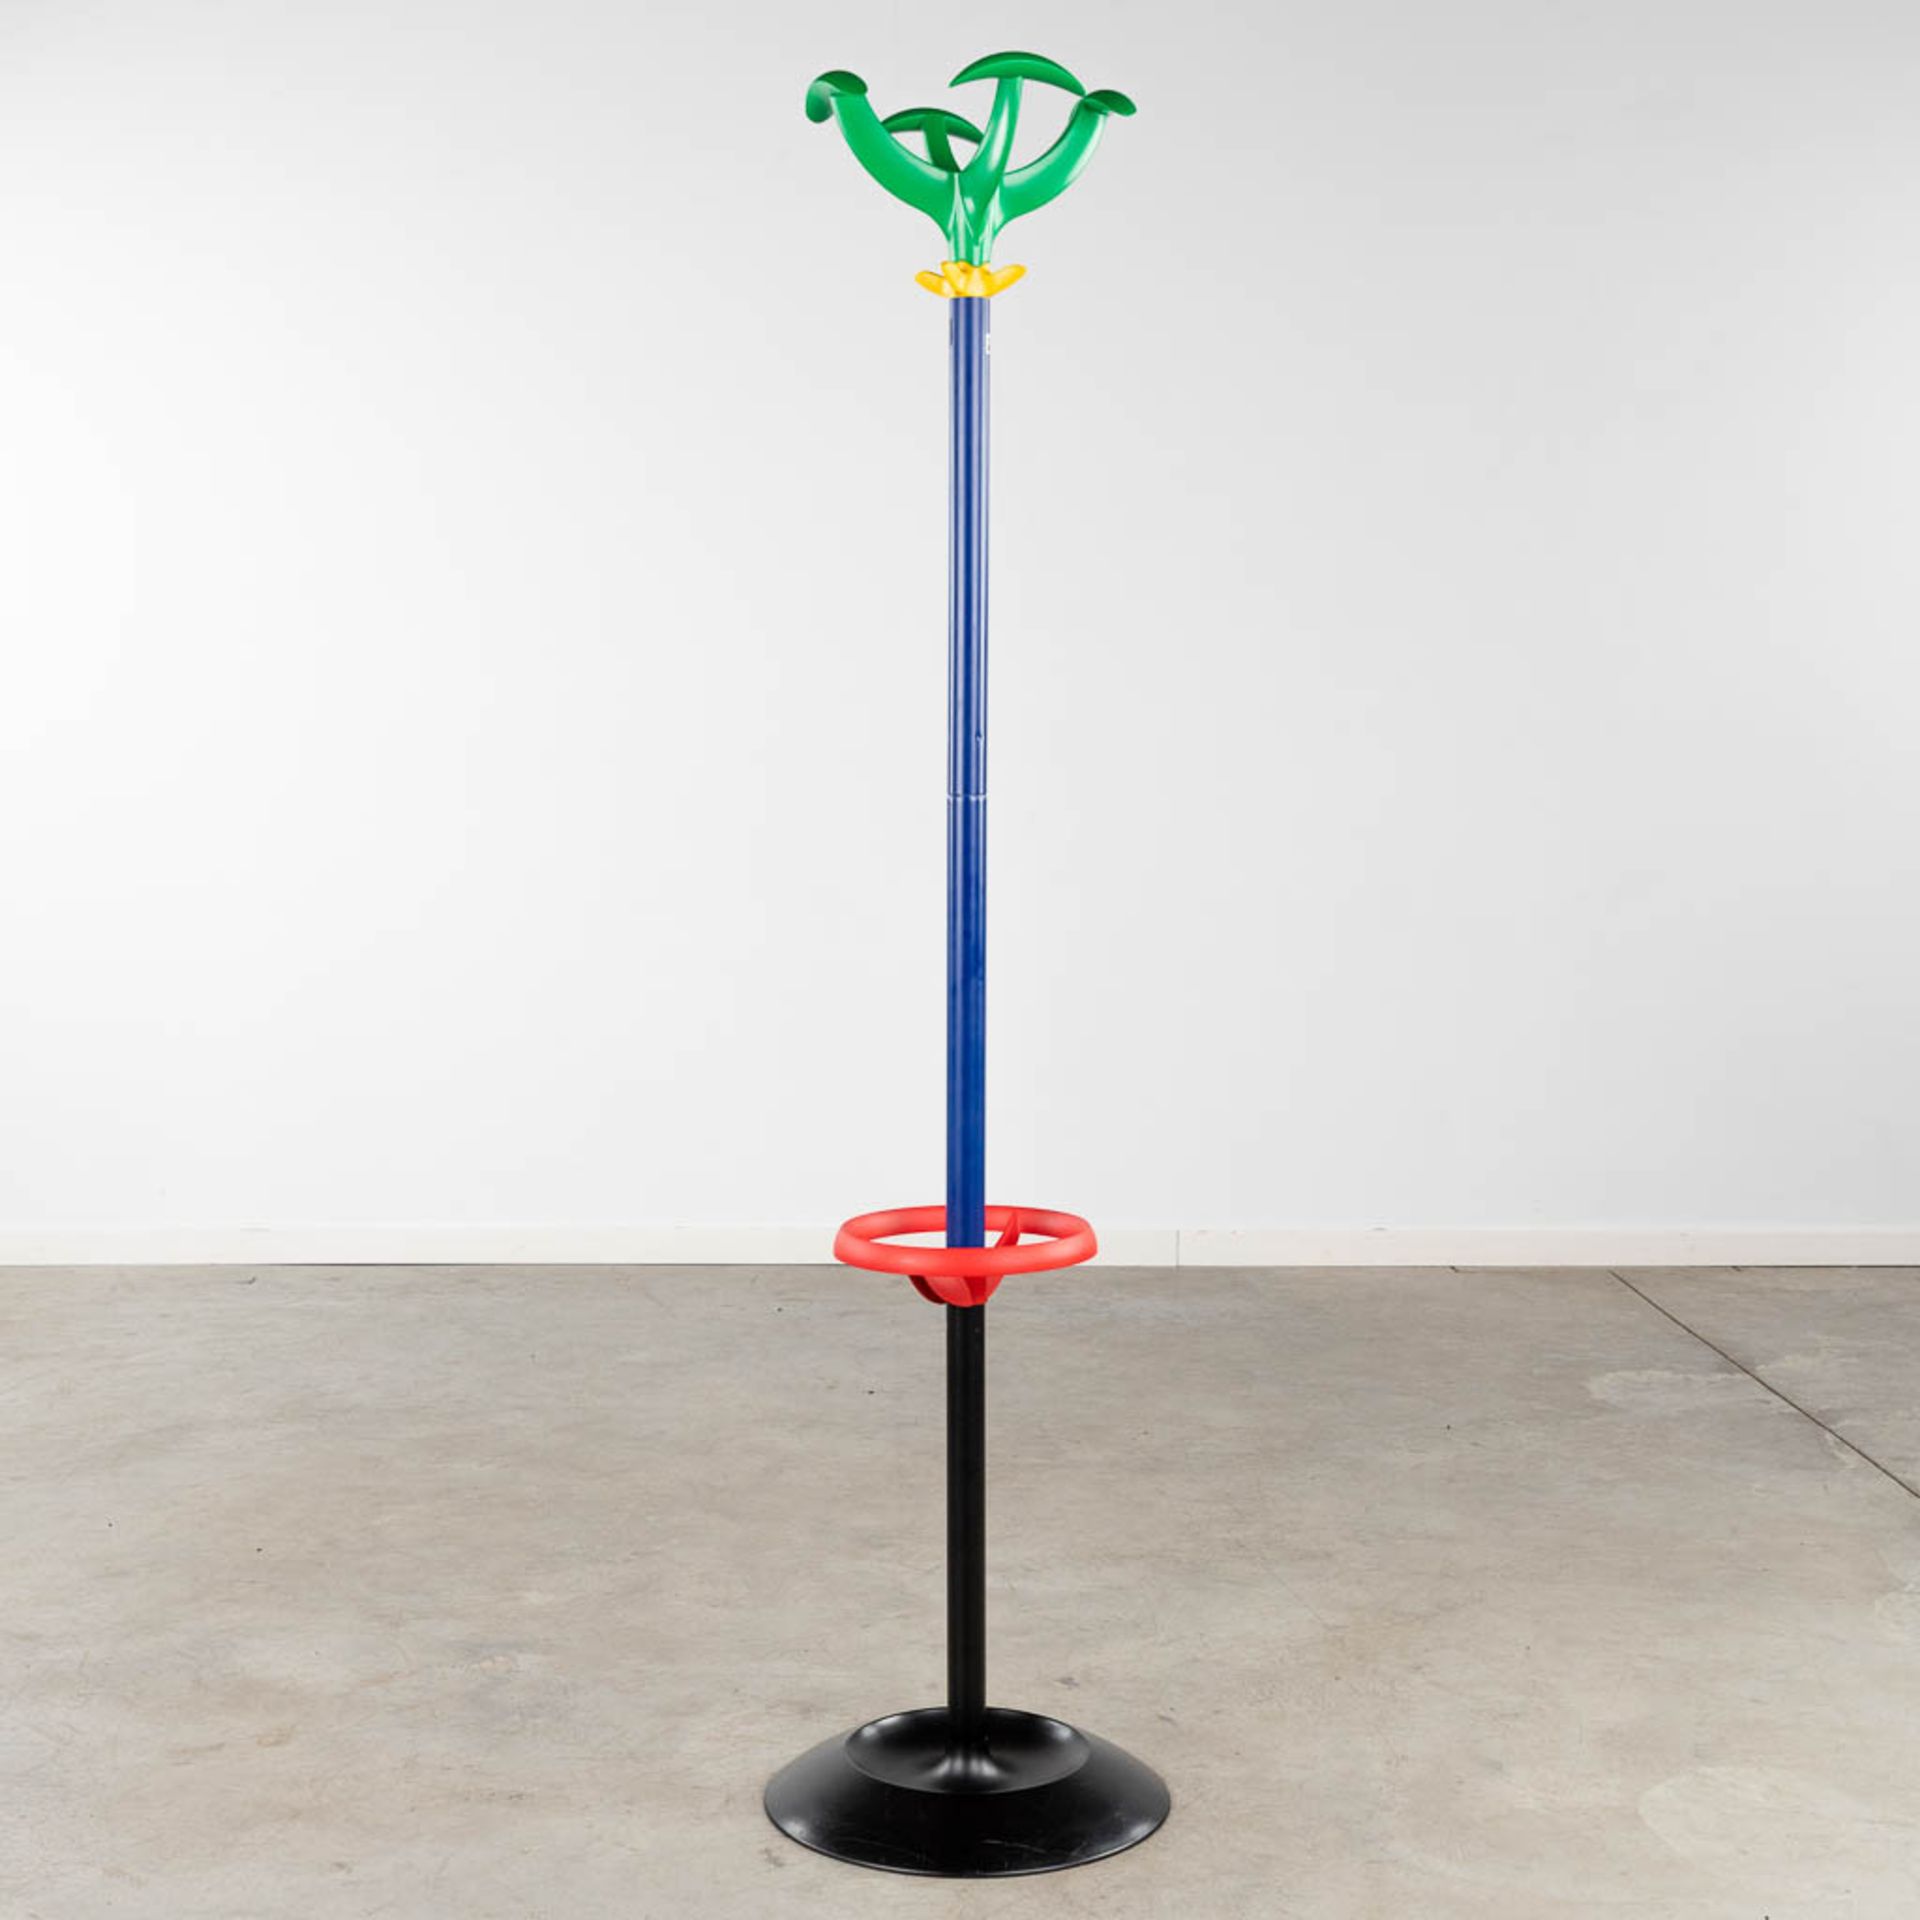 Raul BARBIERI (1946) 'Cactus' for Rexite, a coathanger. (H:165 x D:40 cm) - Image 4 of 13